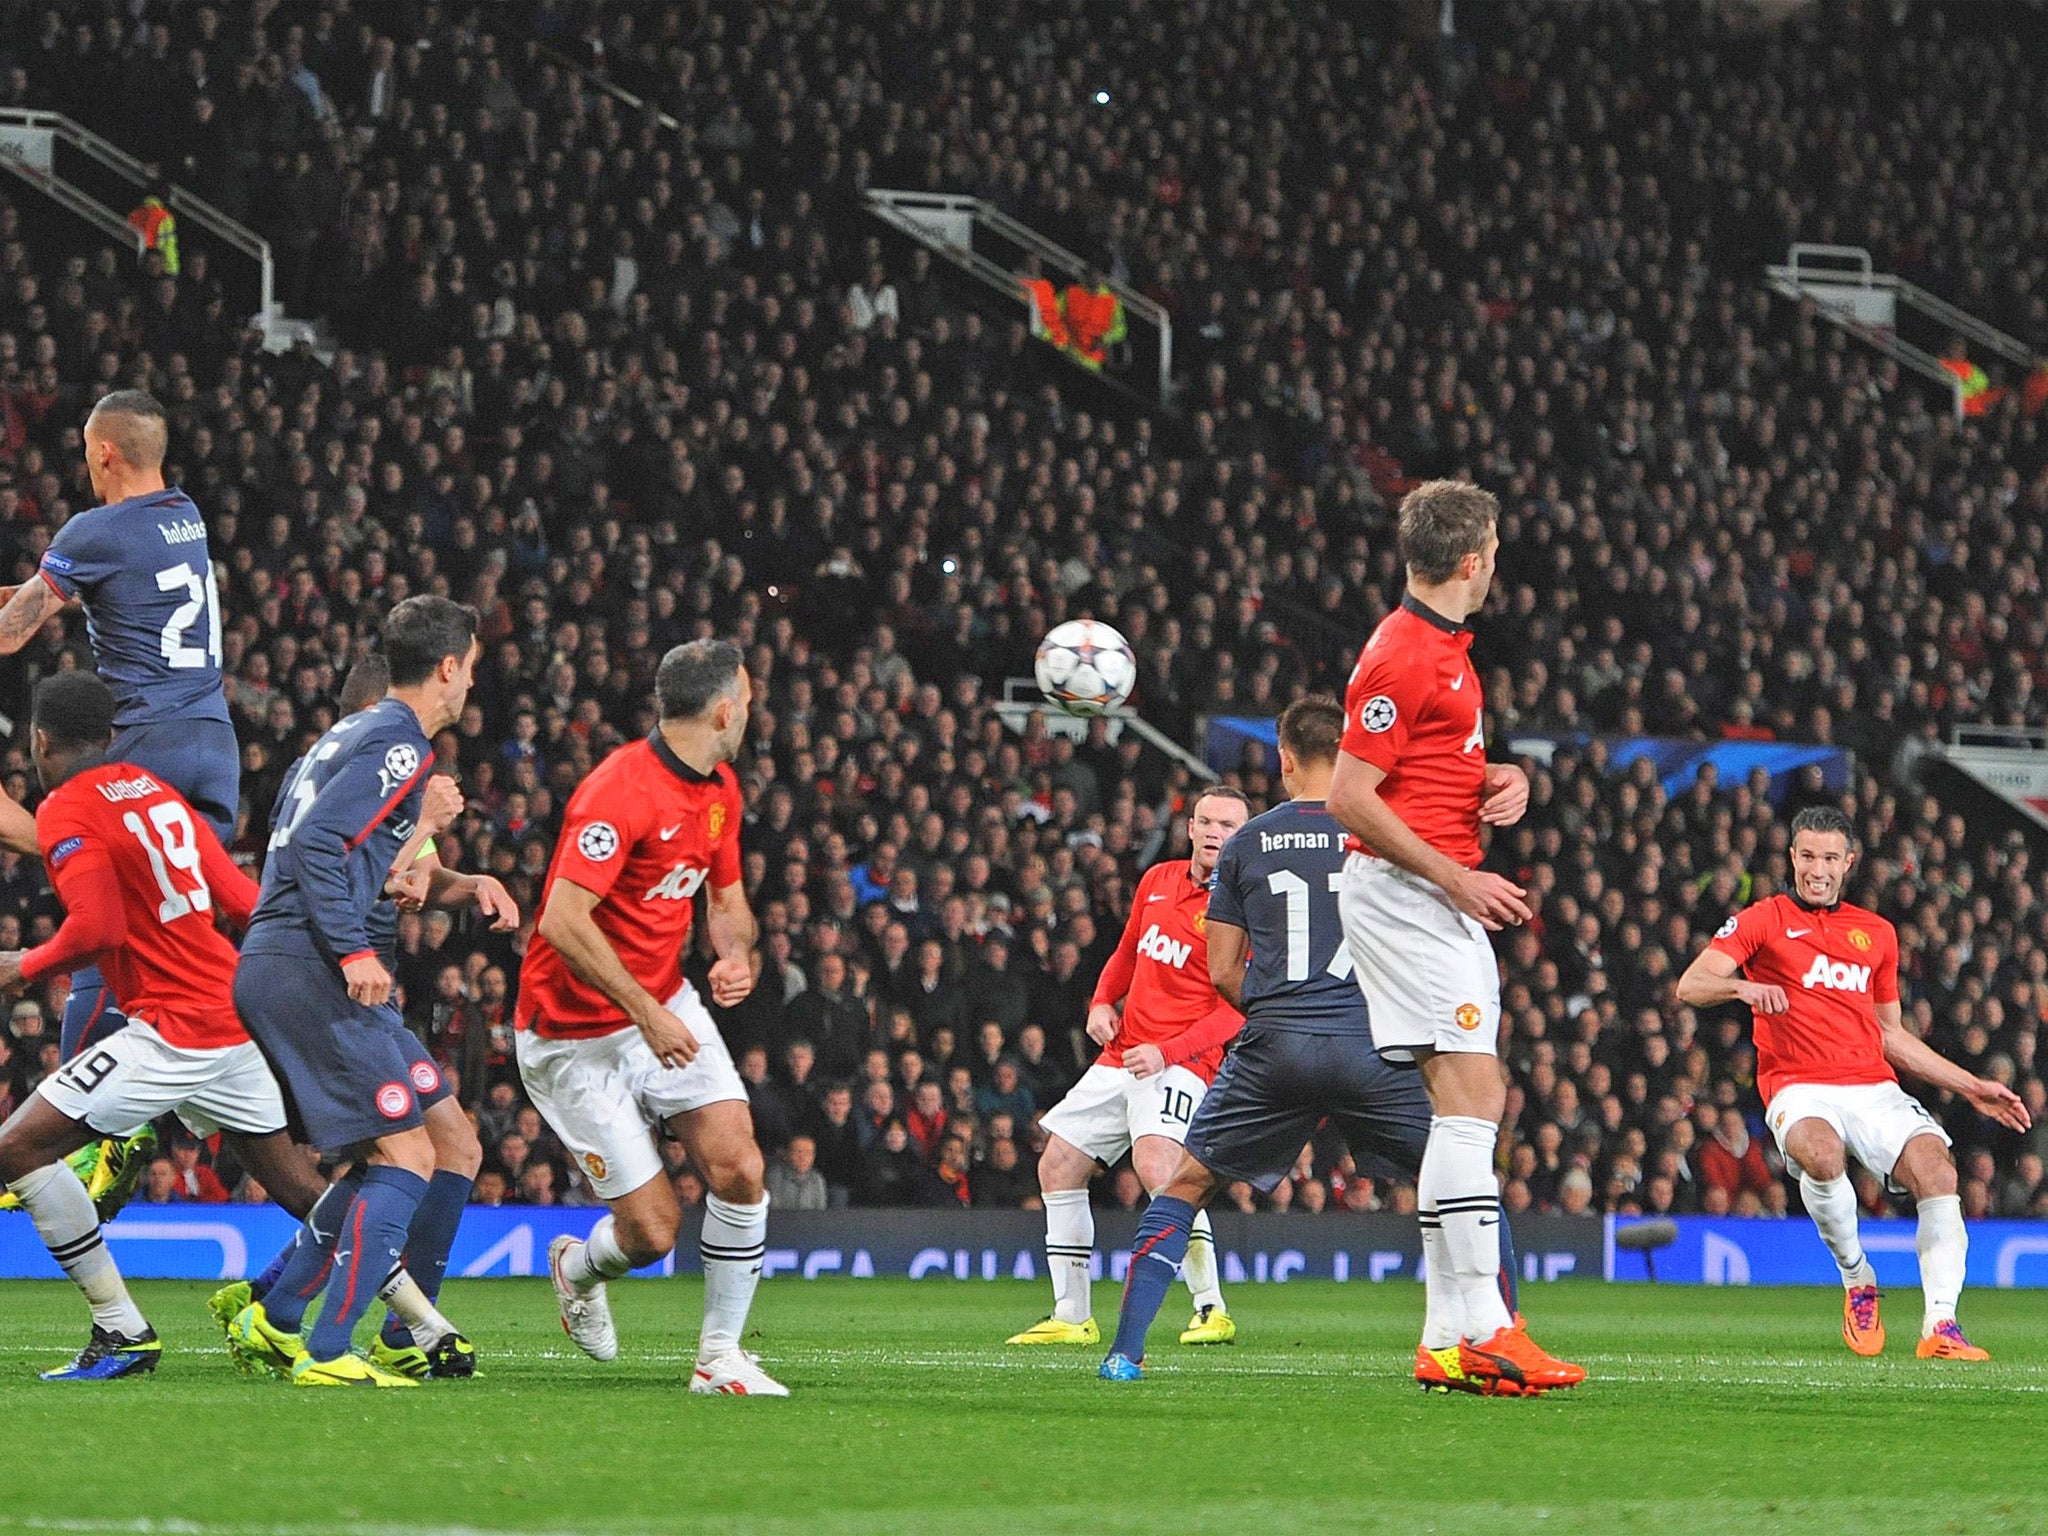 Van Persie completes his hat-trick by scoring from a free-kick